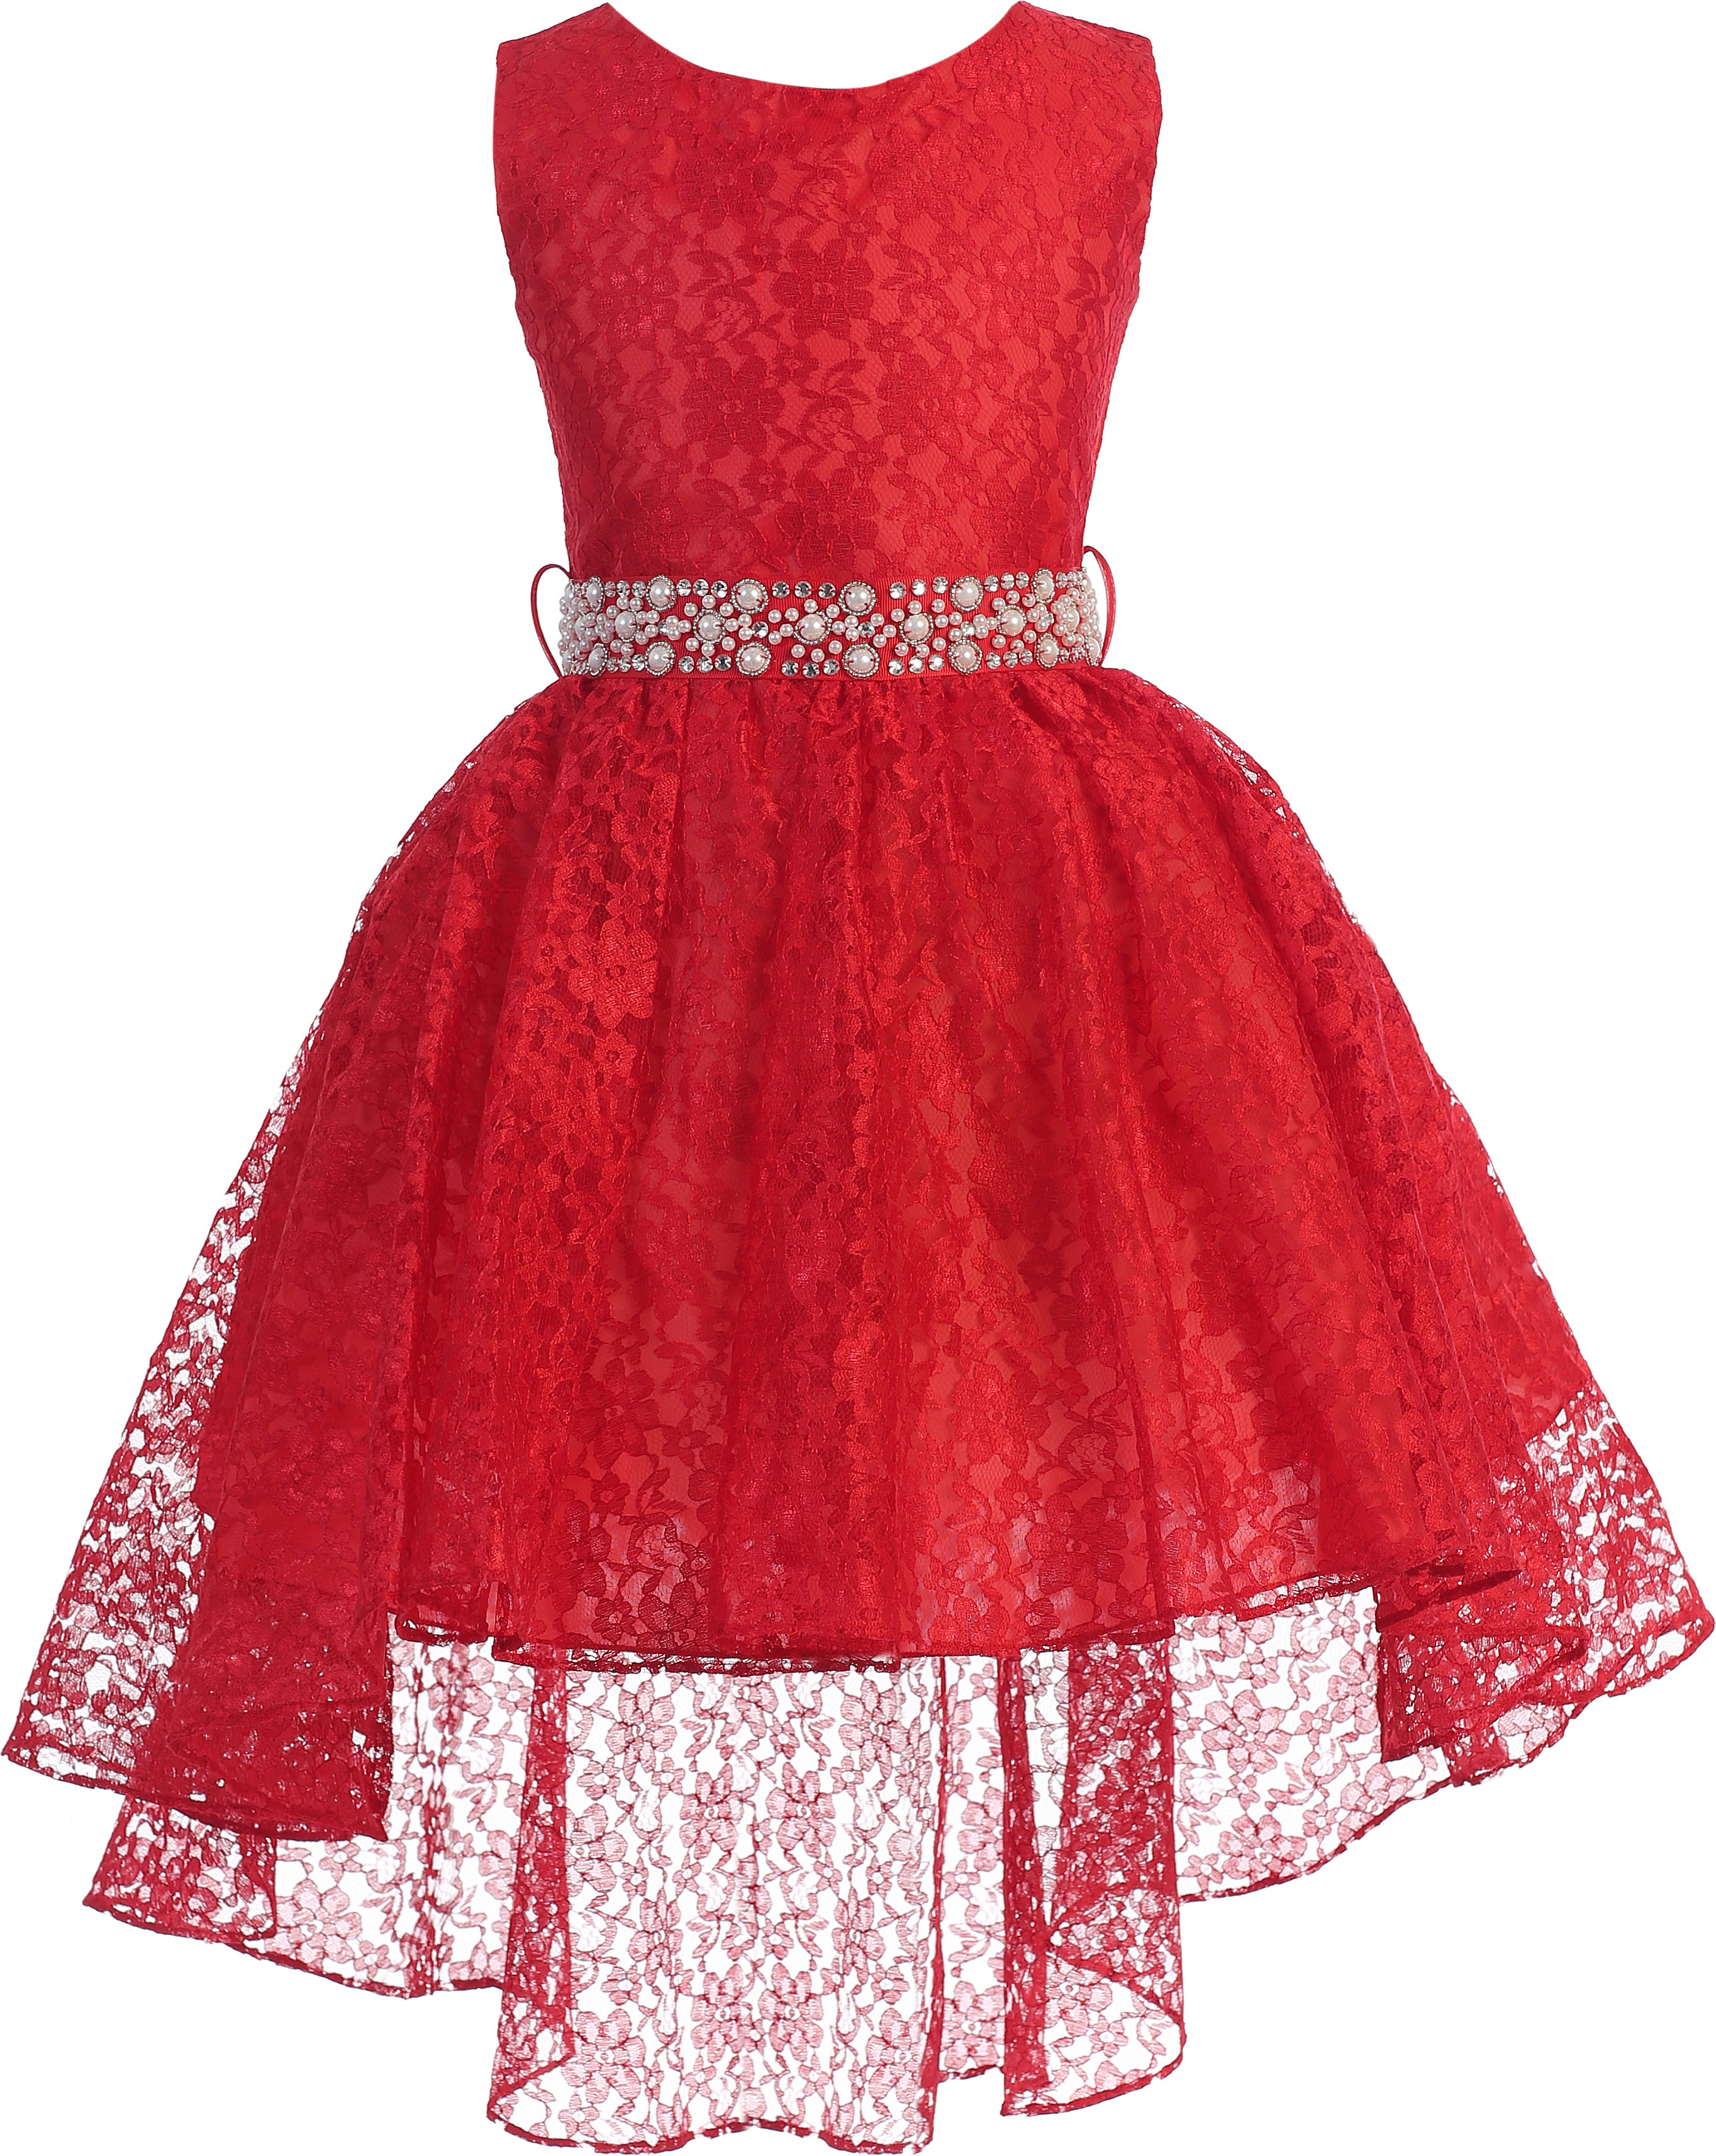 Little Girl Sleeveless Floral Lace Tulle Knee Length Pageant Flower Girl Dress Flower Girl Dress (J3744K) Red 2 - image 1 of 3